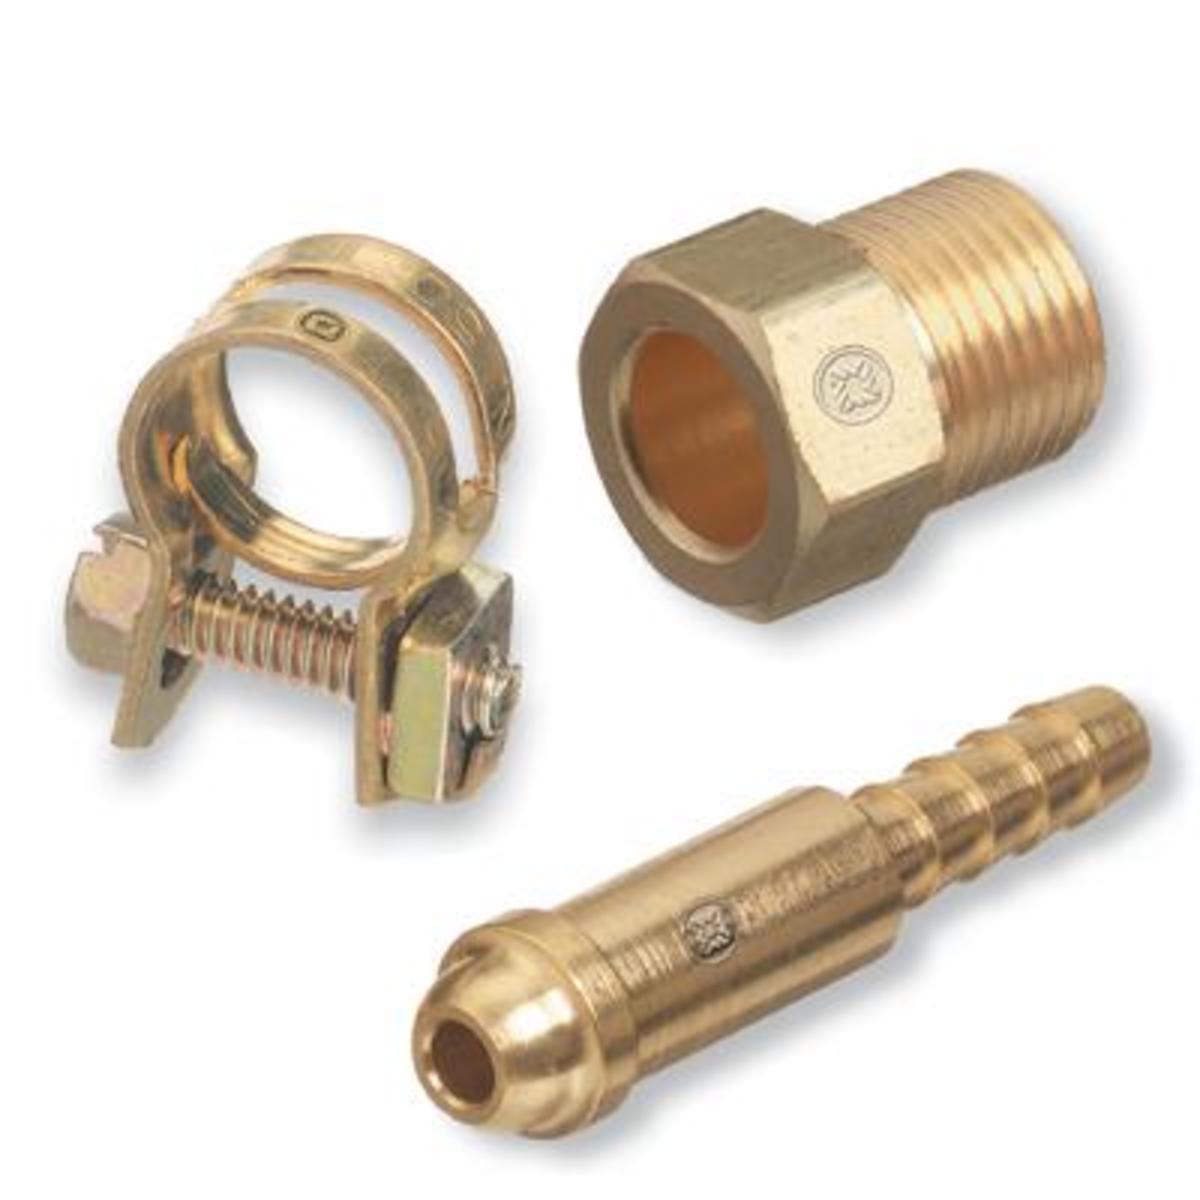 Argon Corgon Protection Gas Hose Fit with 1/4" RH Throw Nuts 